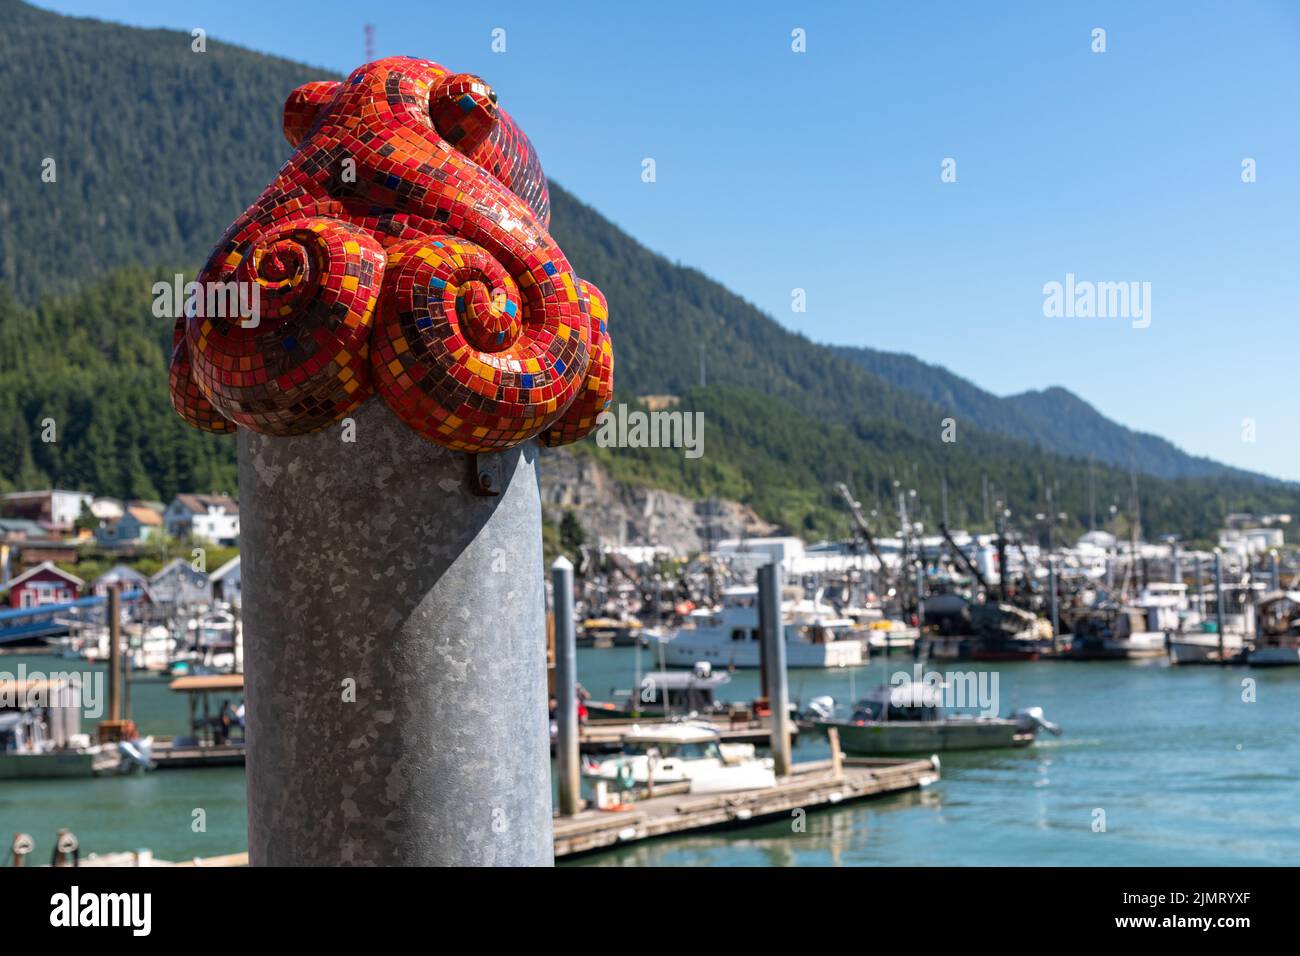 The mosaic octopus sculpture by artist Terry Pyles on a piling cap along the Thomas Basin in Ketchikan, Alaska. Stock Photo